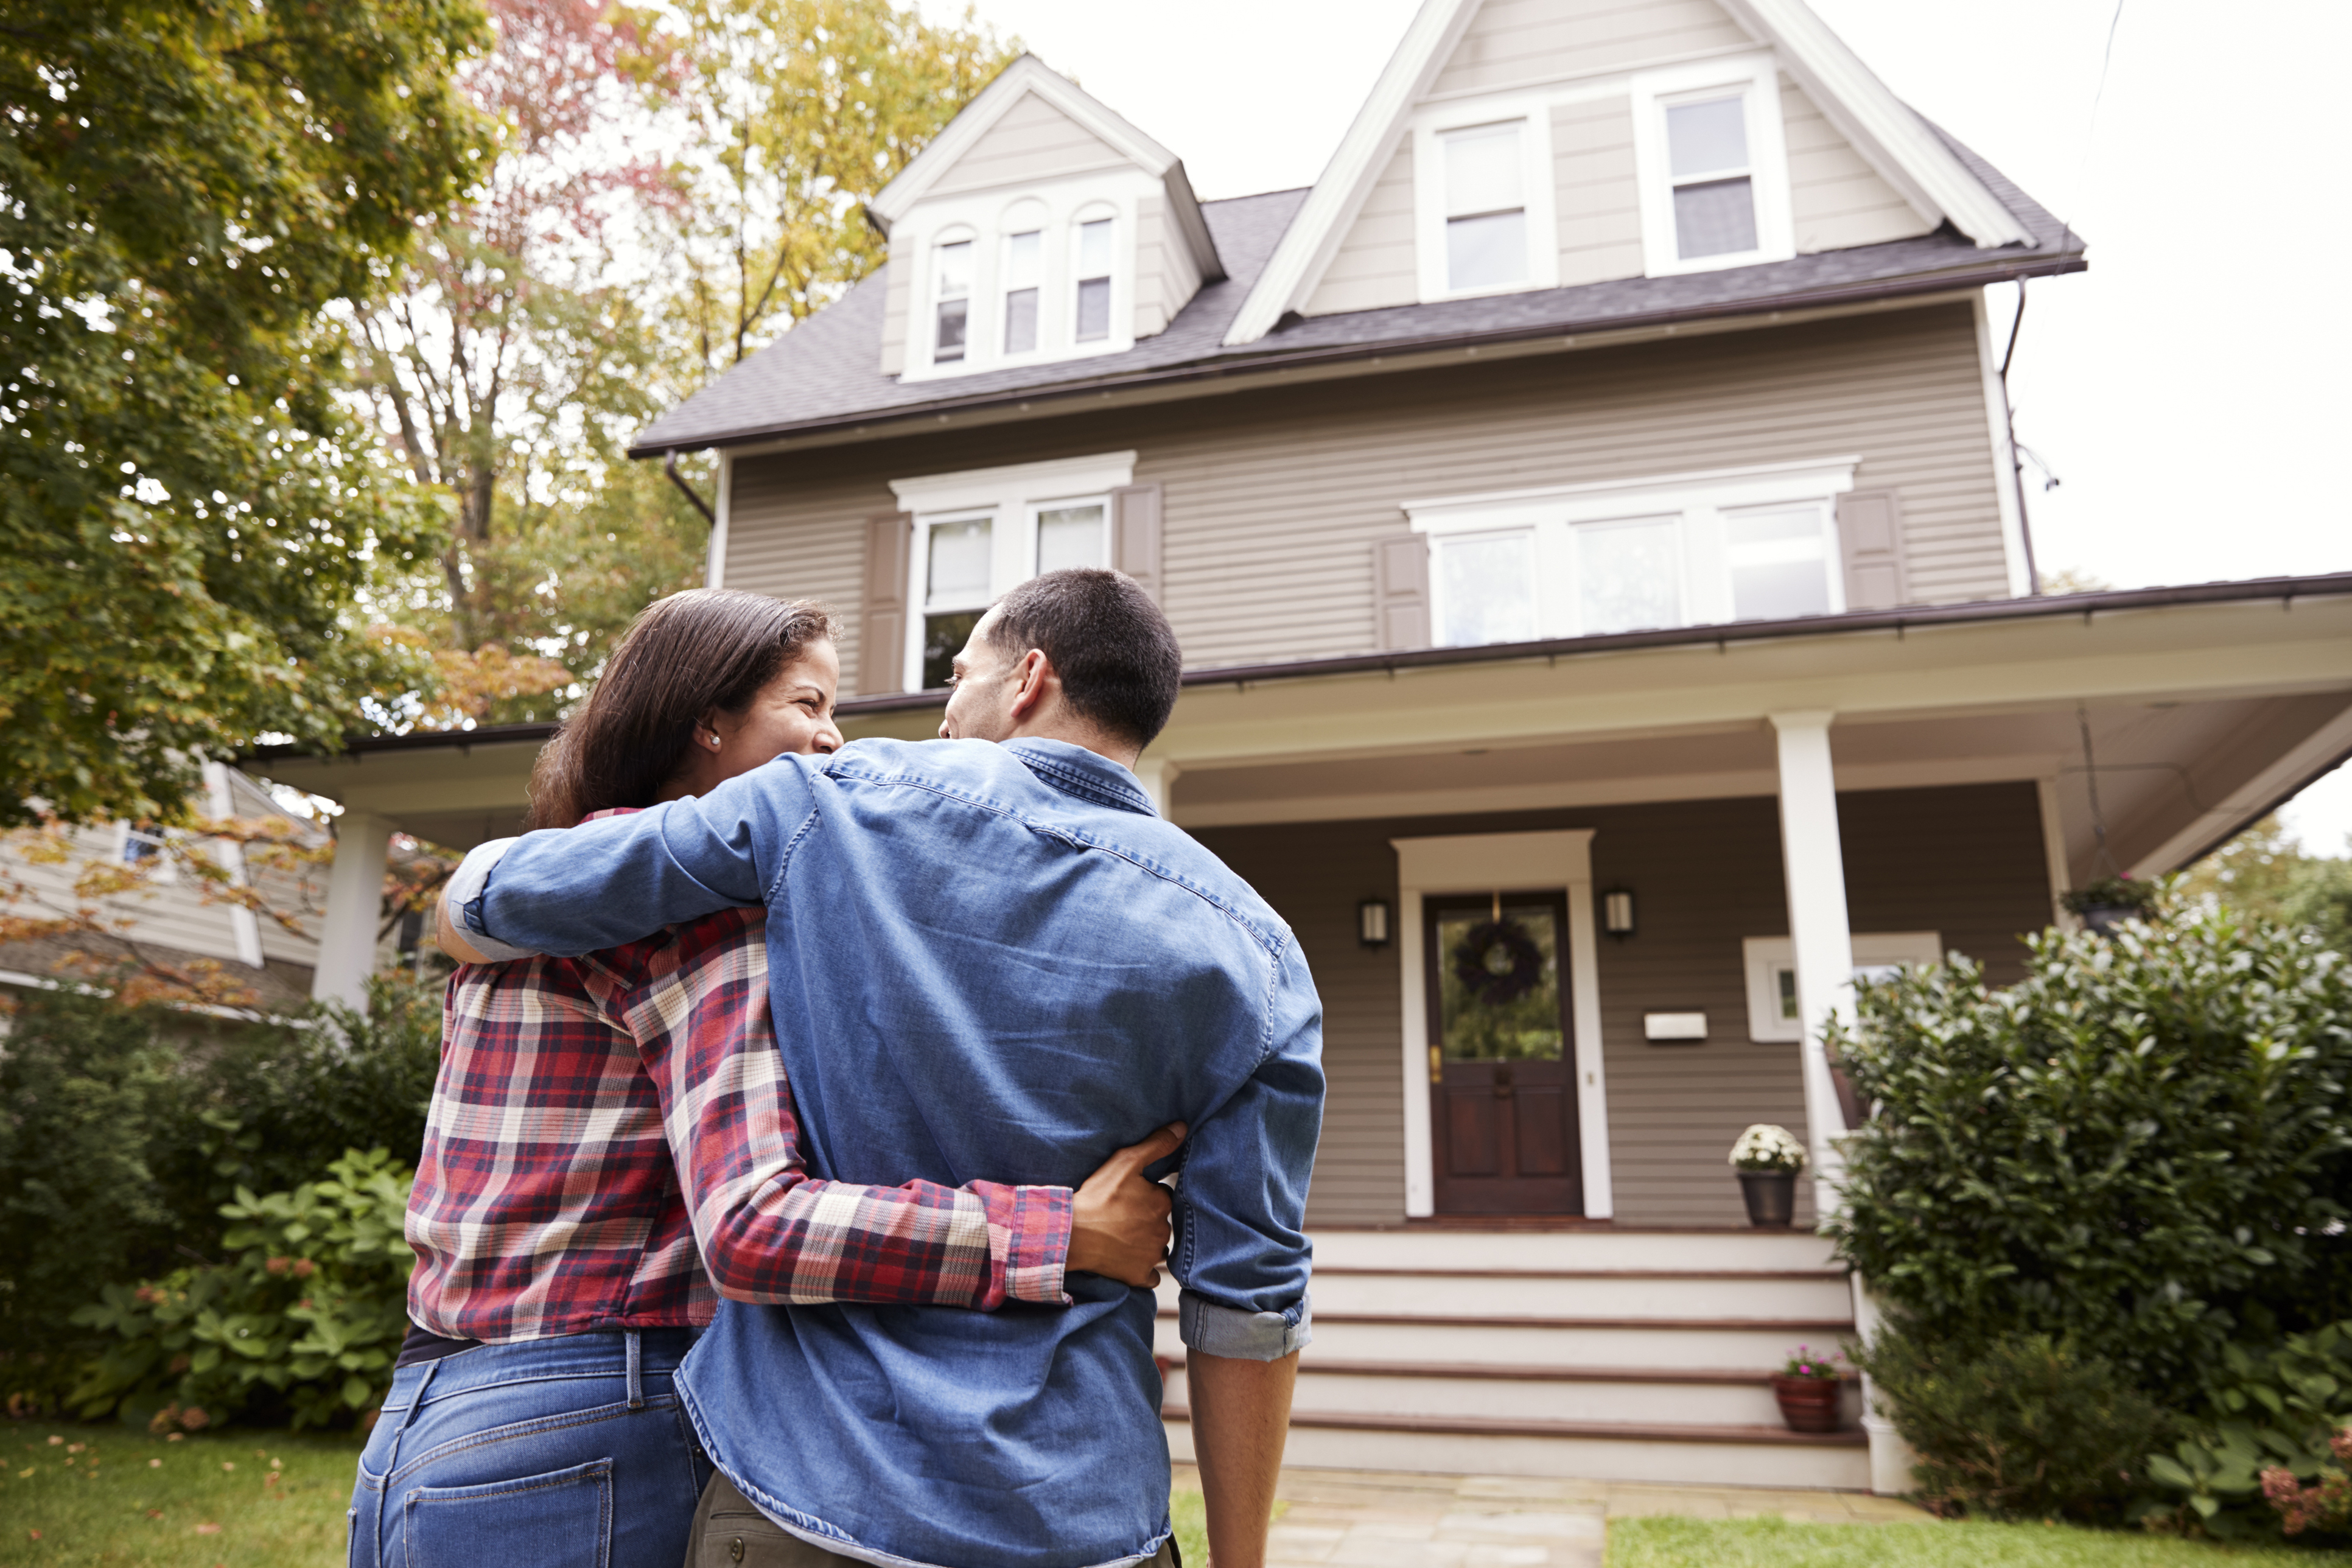 Are You Ready to Buy Your First Home?